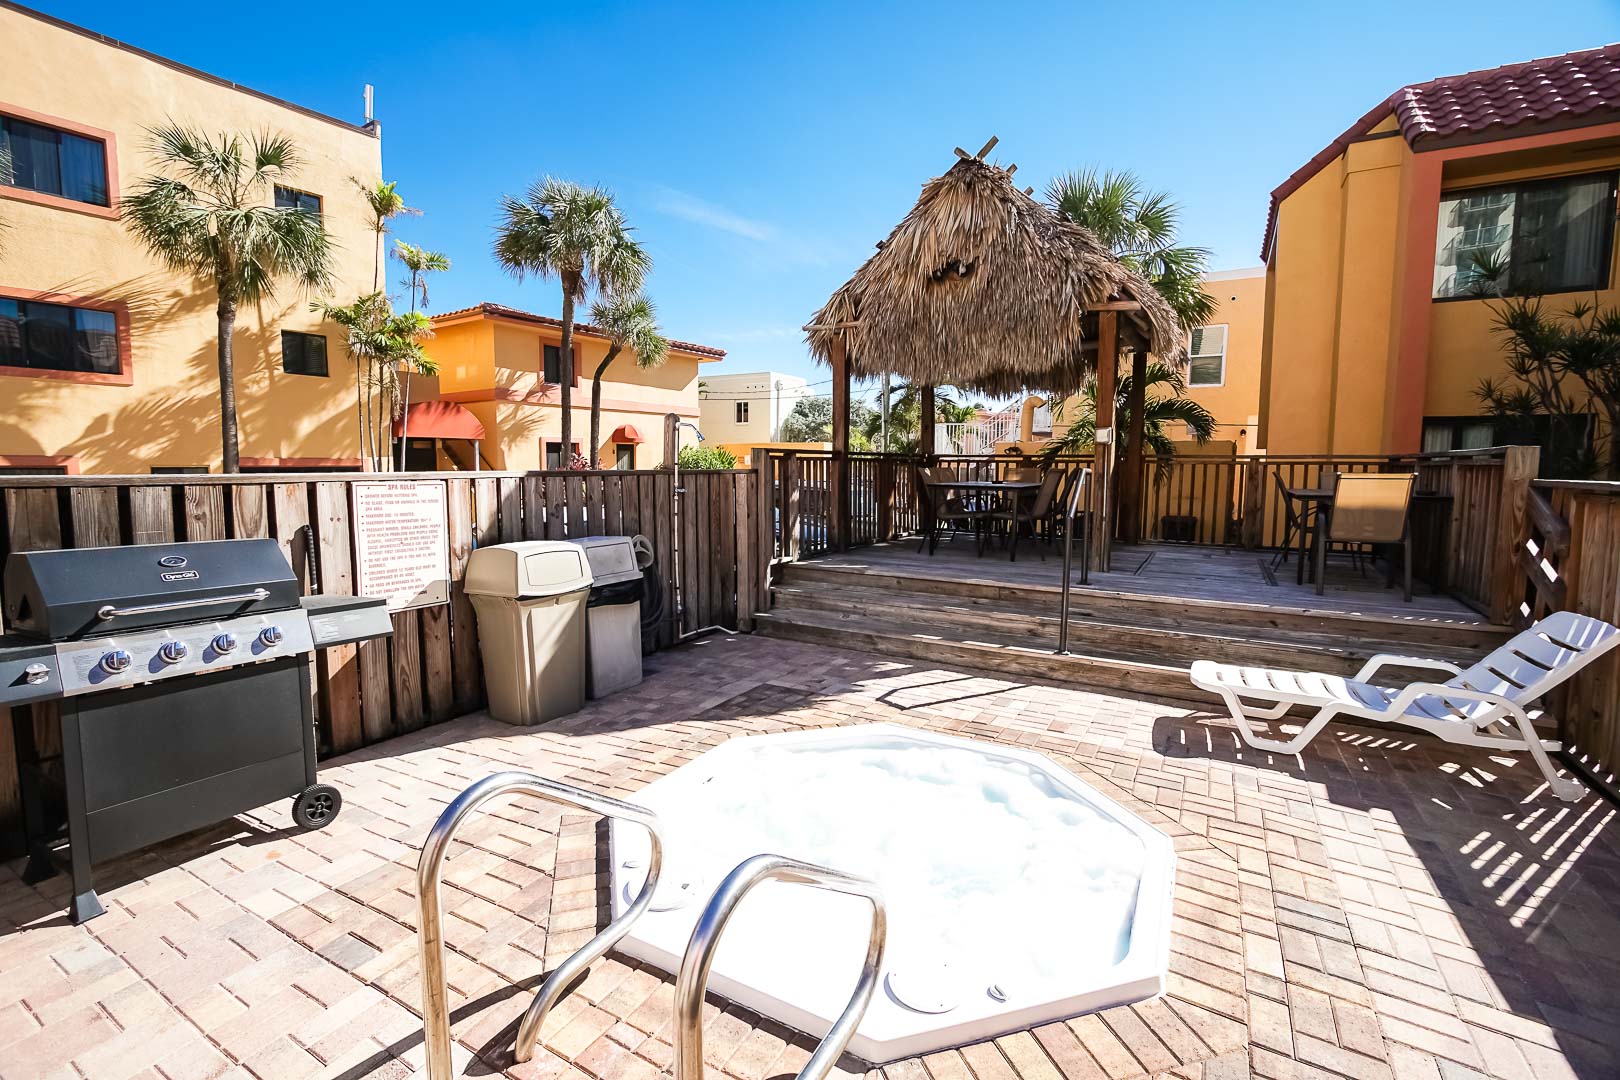 An outdoor Jacuzzi tub and BBQ Grills at VRI's Hollywood Sands Resort in Hollywood, Florida.